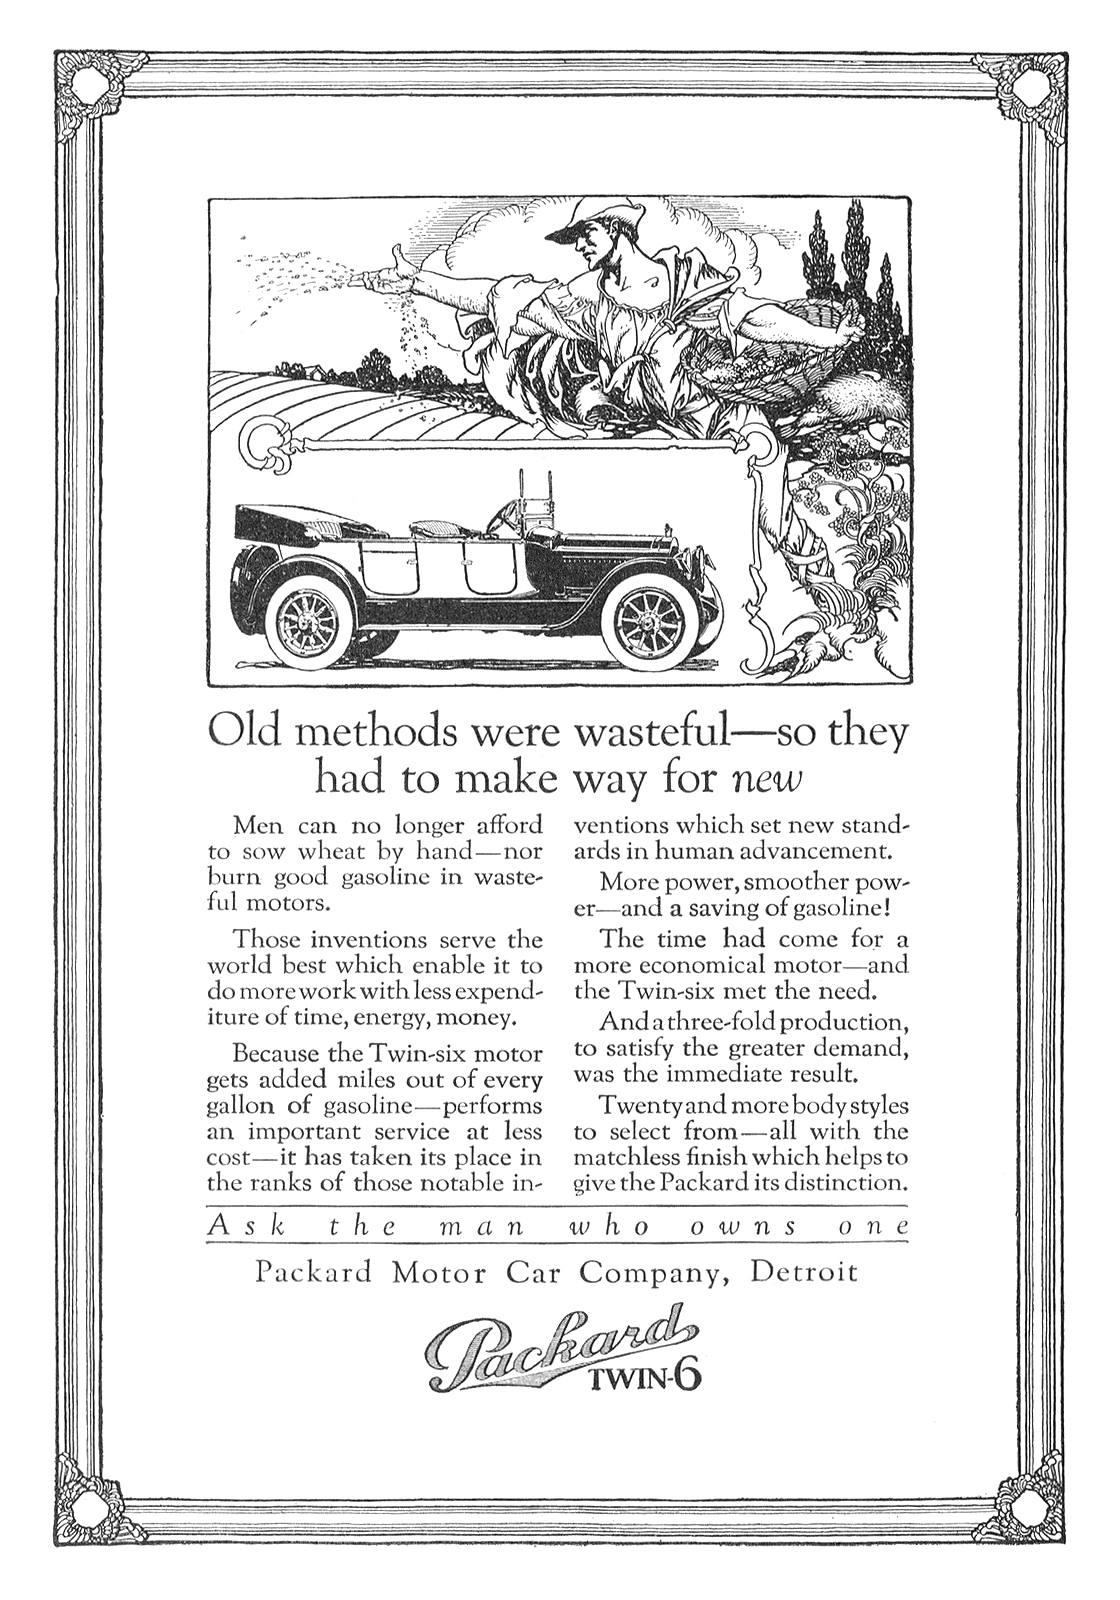 Packard Twin-6 Ad (June–July, 1917) – Old methods were wasteful—so they had to make way for new – Illustrated by Alfred Garth Jones?